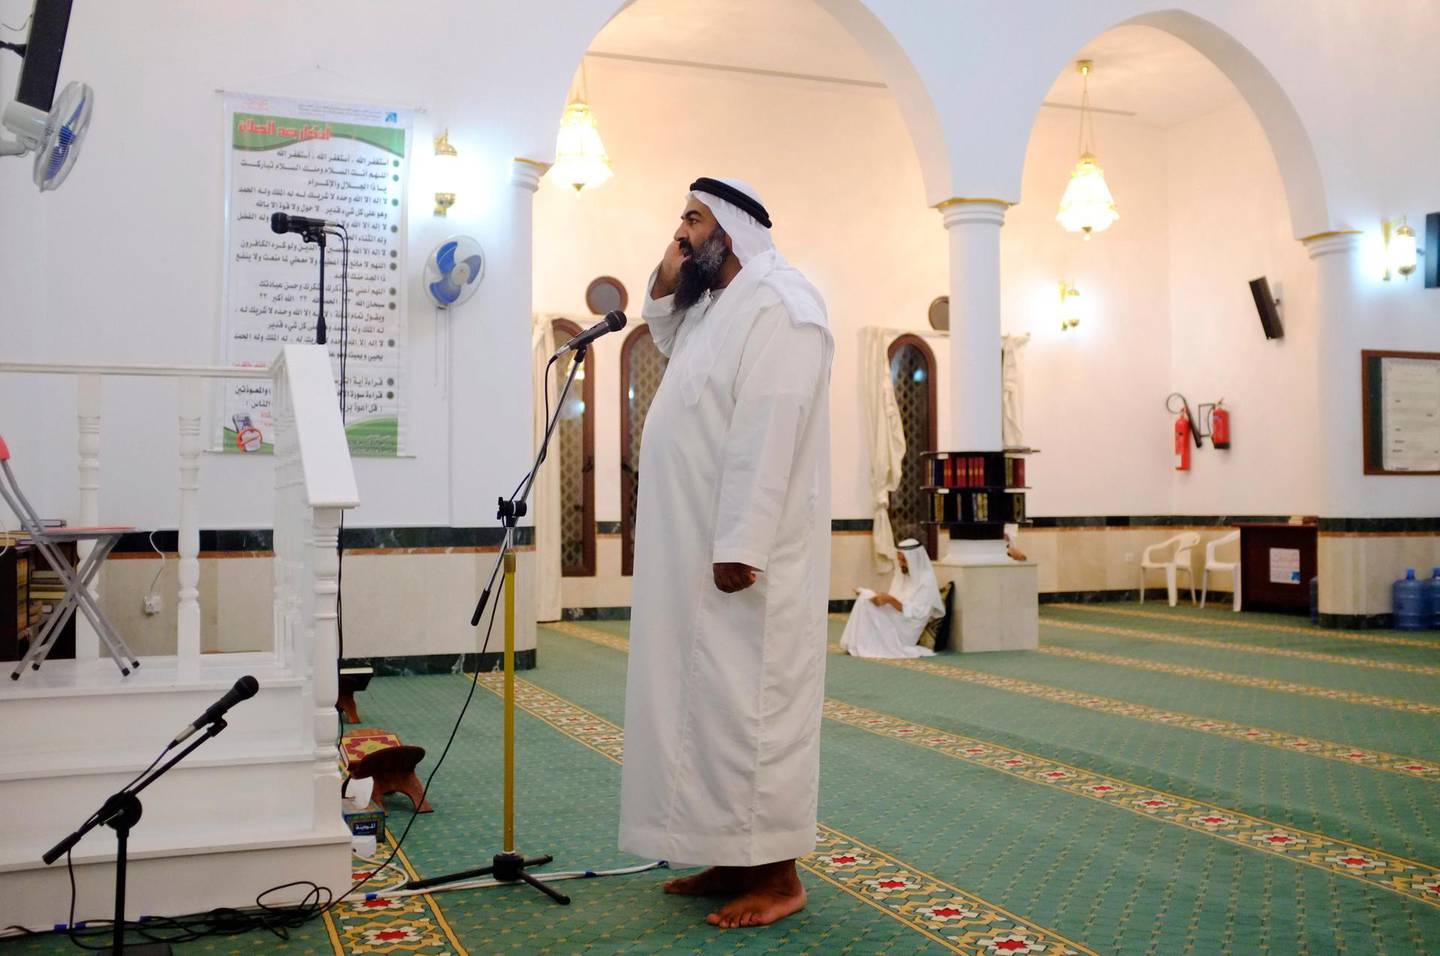 August 21. Emirate, Ahmed Al Hashemi does the call to prayer at the Sheikh Rashid bin Saeed Al Maktoum Mosque situated in one of the newly constructed neigbourhoods in Hatta. August 21, Dubai. United Arab Emirates (Photo: Antonie Robertson/The National)